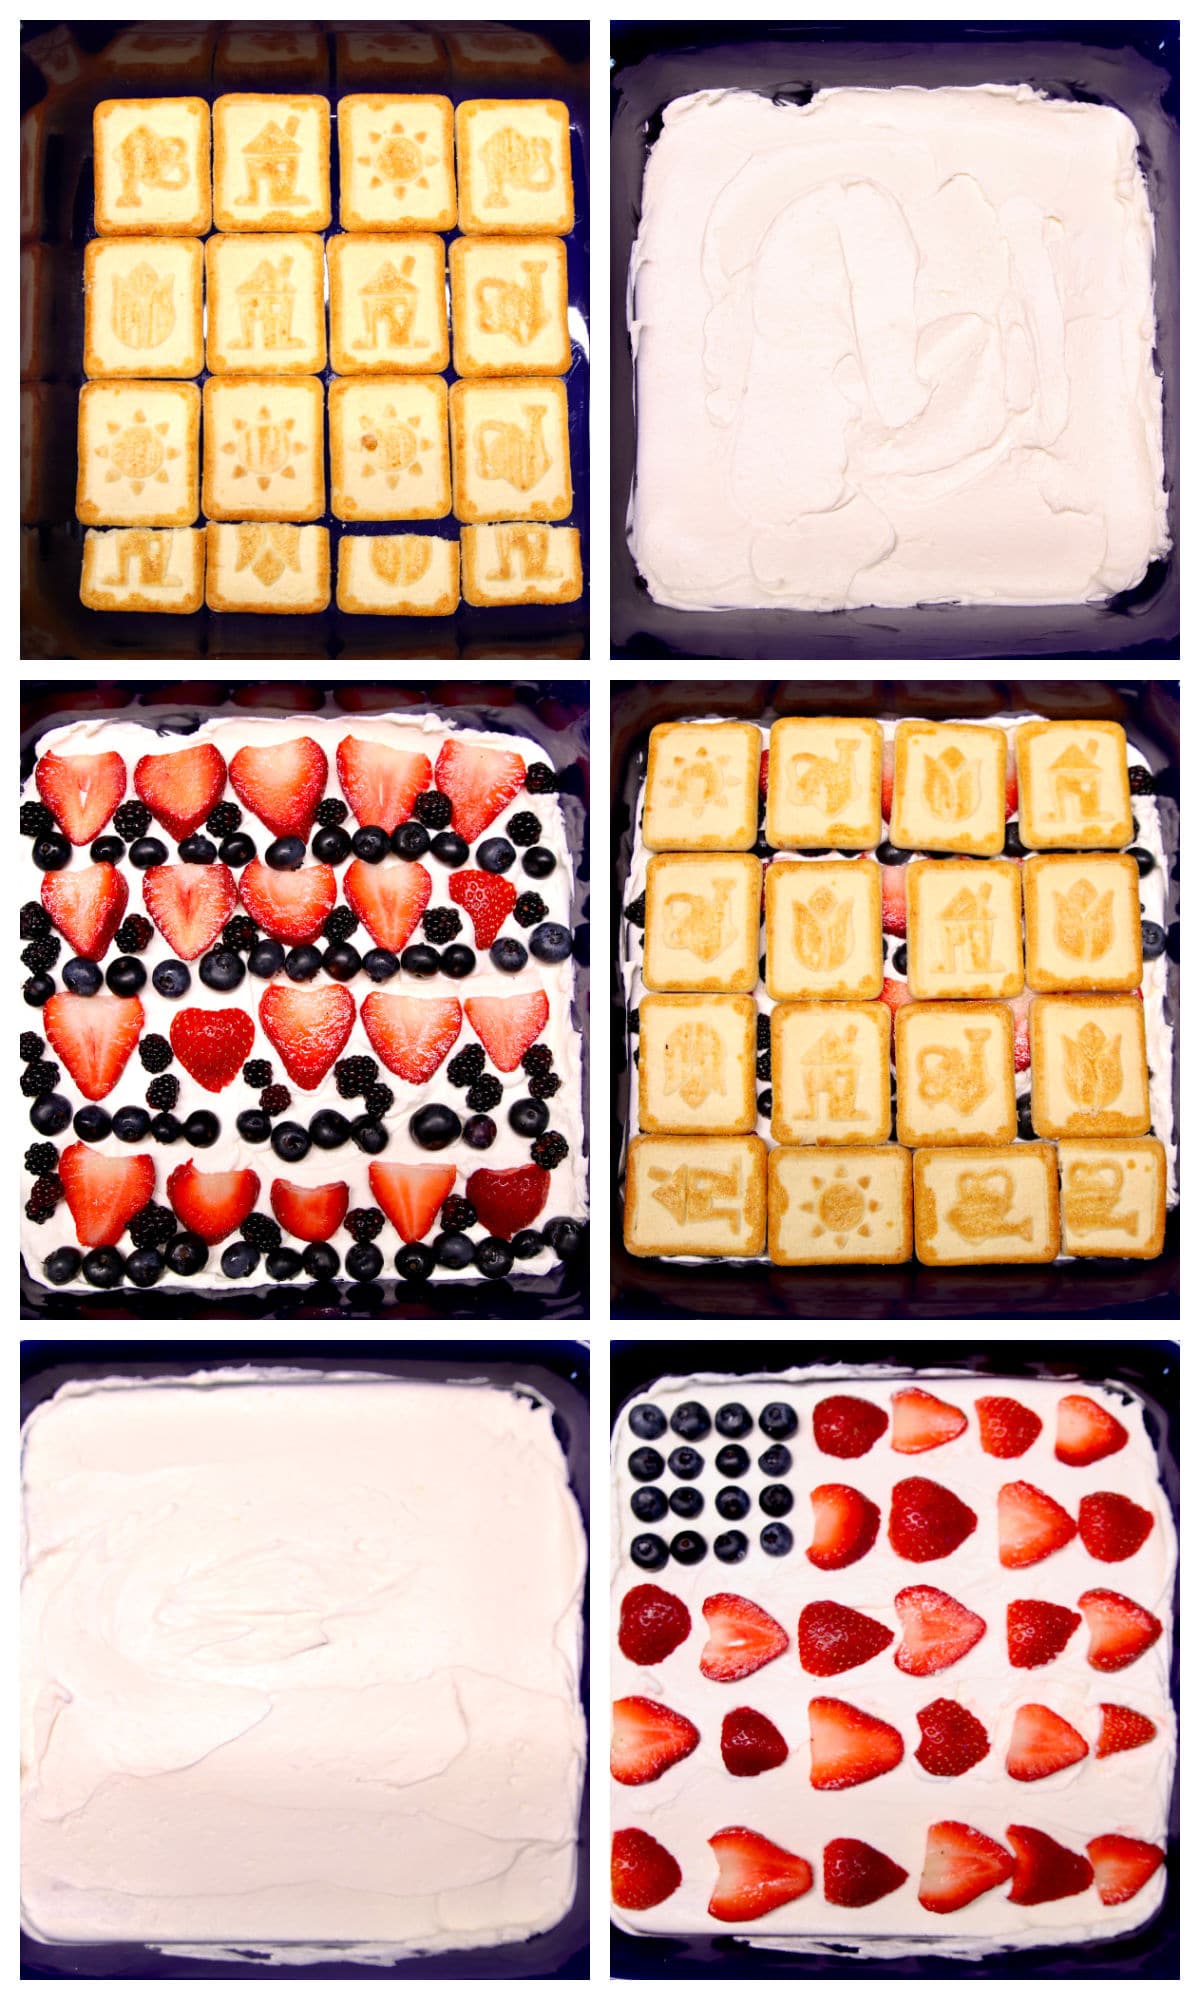 Collage making layered icebox cake with berries.